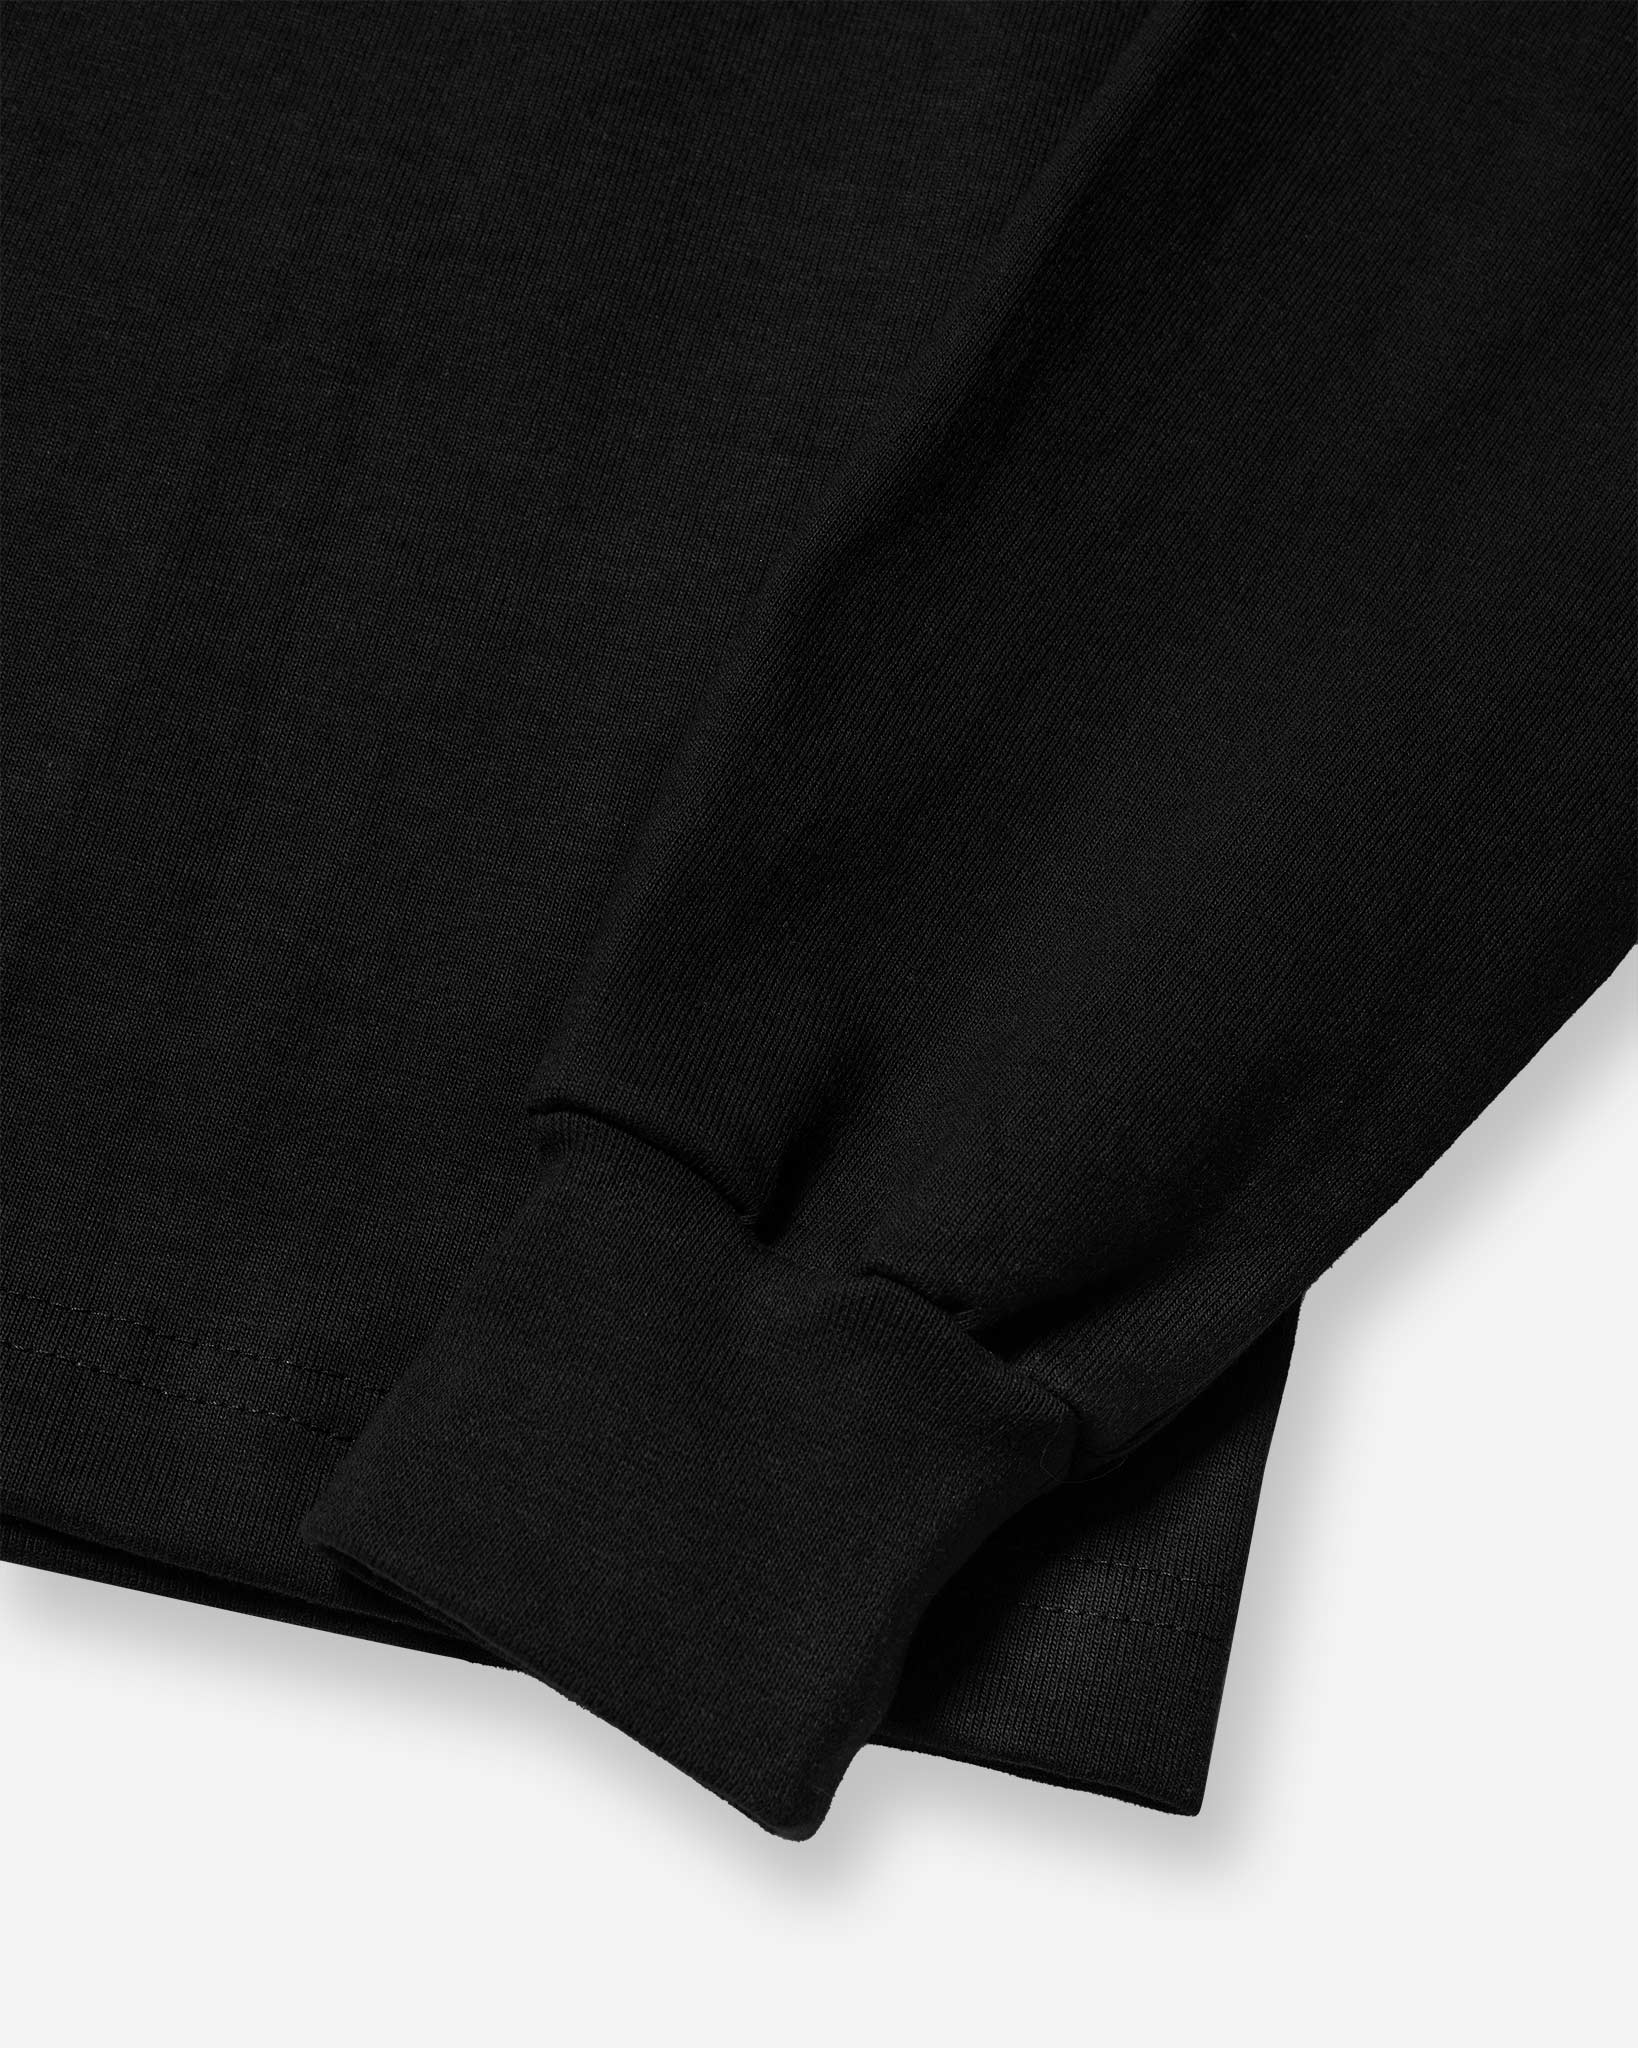 MAX-WEIGHT® Long Sleeve - Black